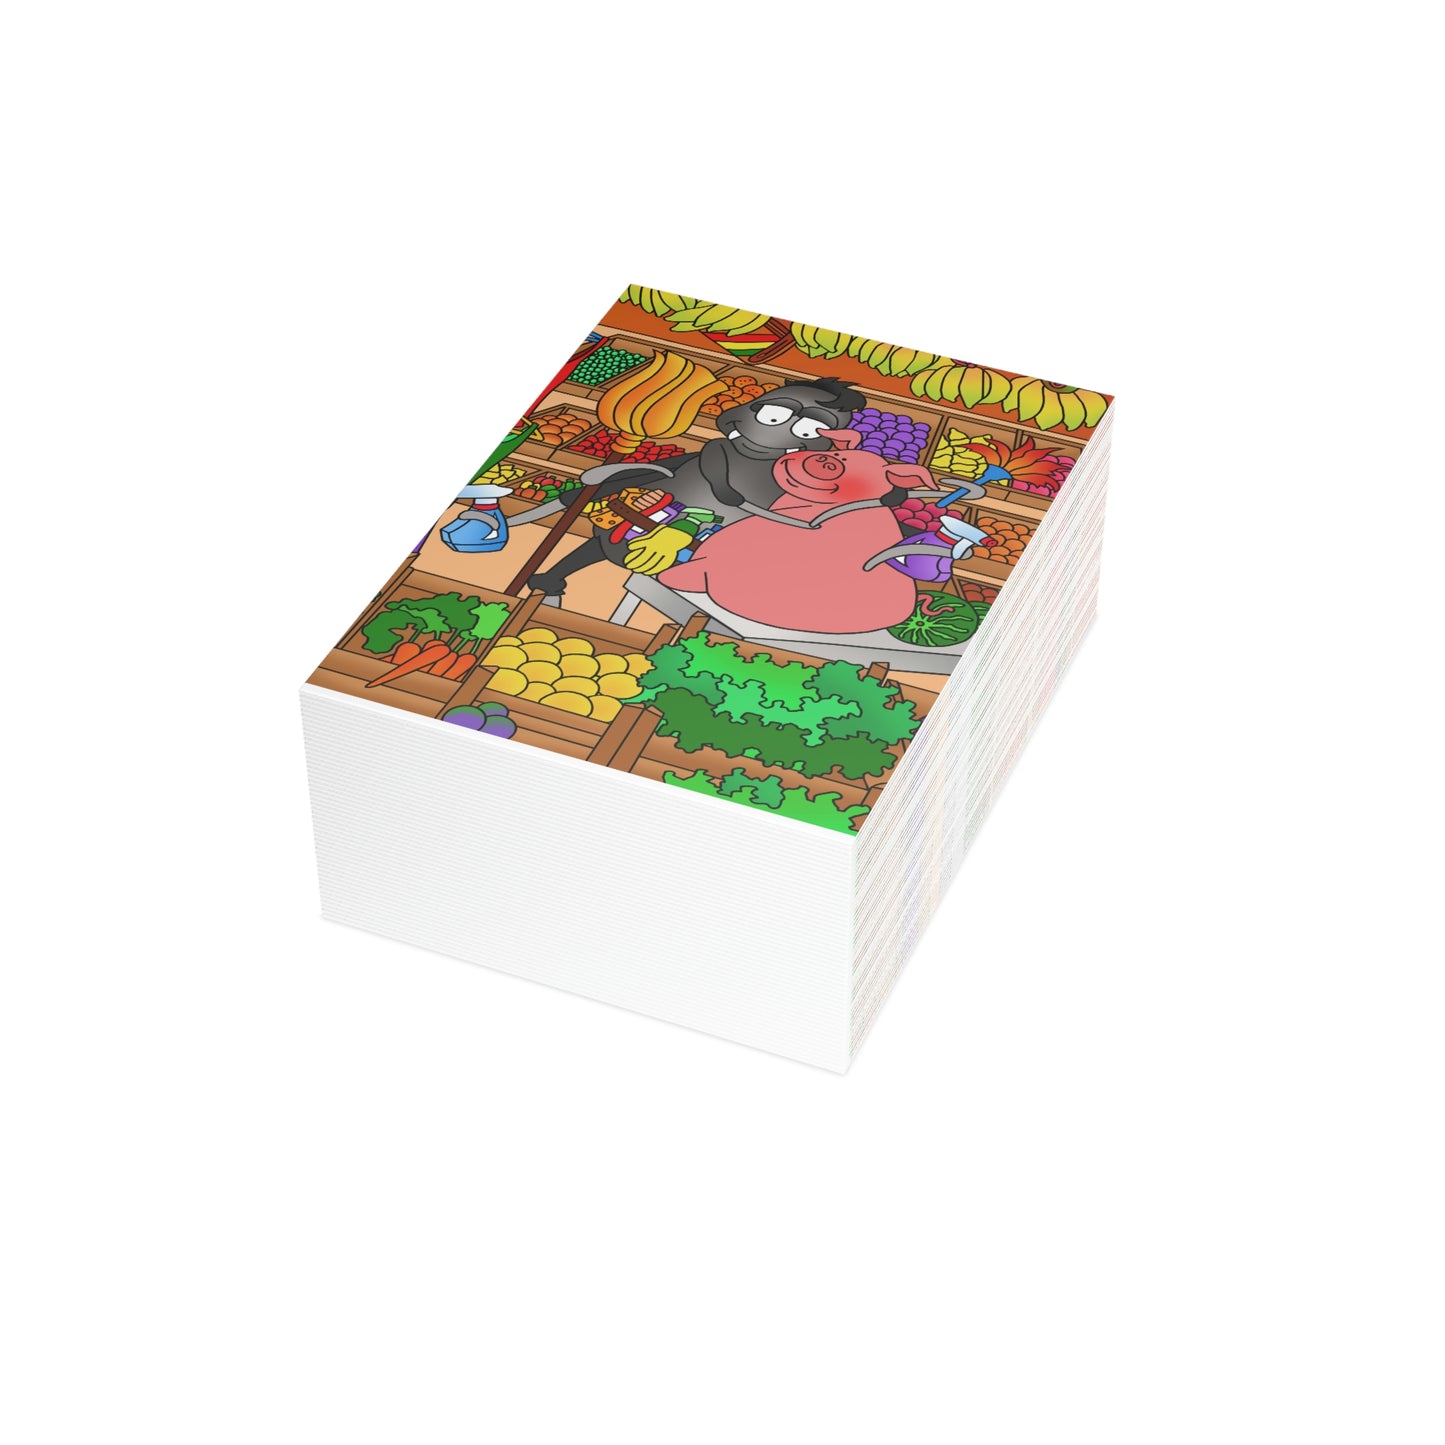 Anansi and the Market Pig Greeting Cards (1, 10, 30, and 50pcs)